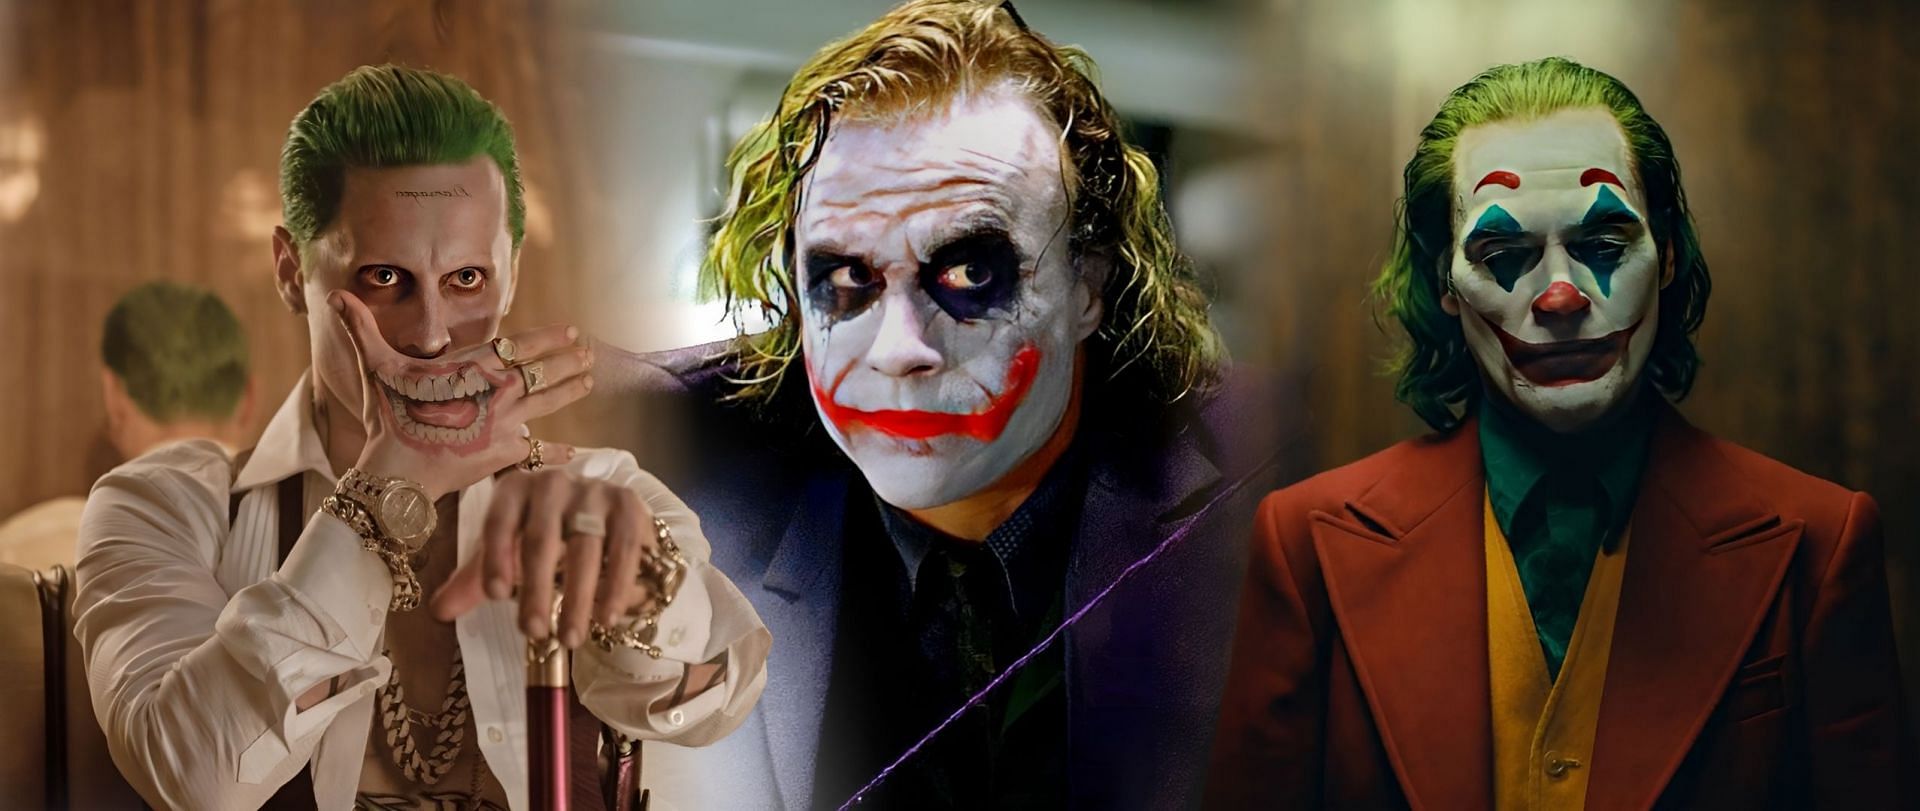 The Joker 2: What we know so far